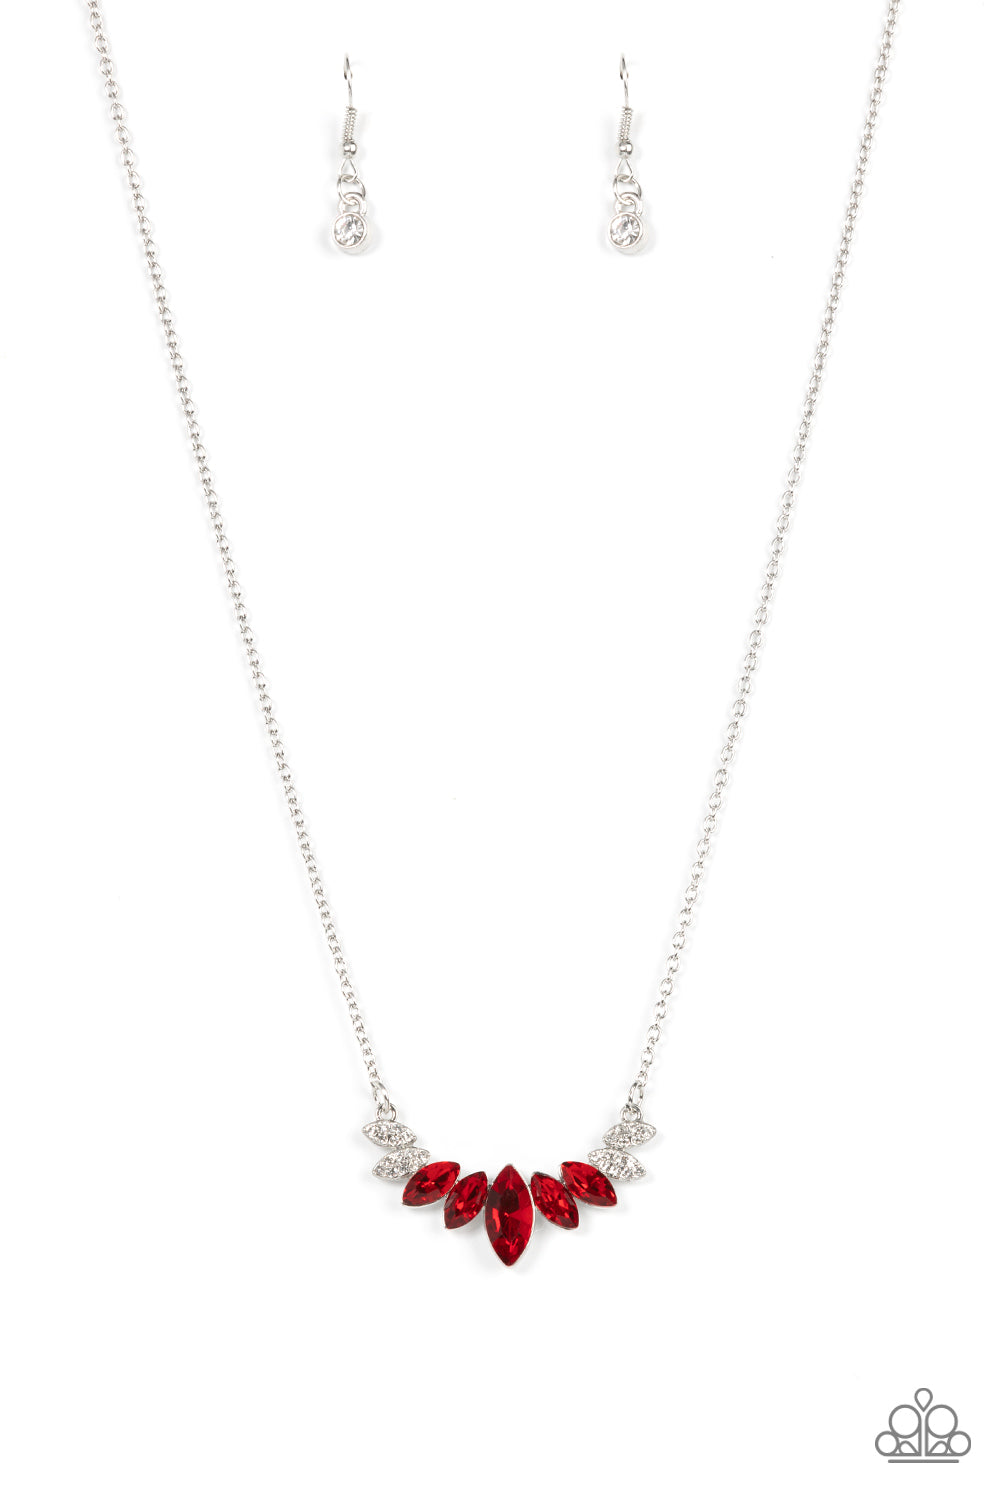 One Empire at a Time - red - Paparazzi necklace